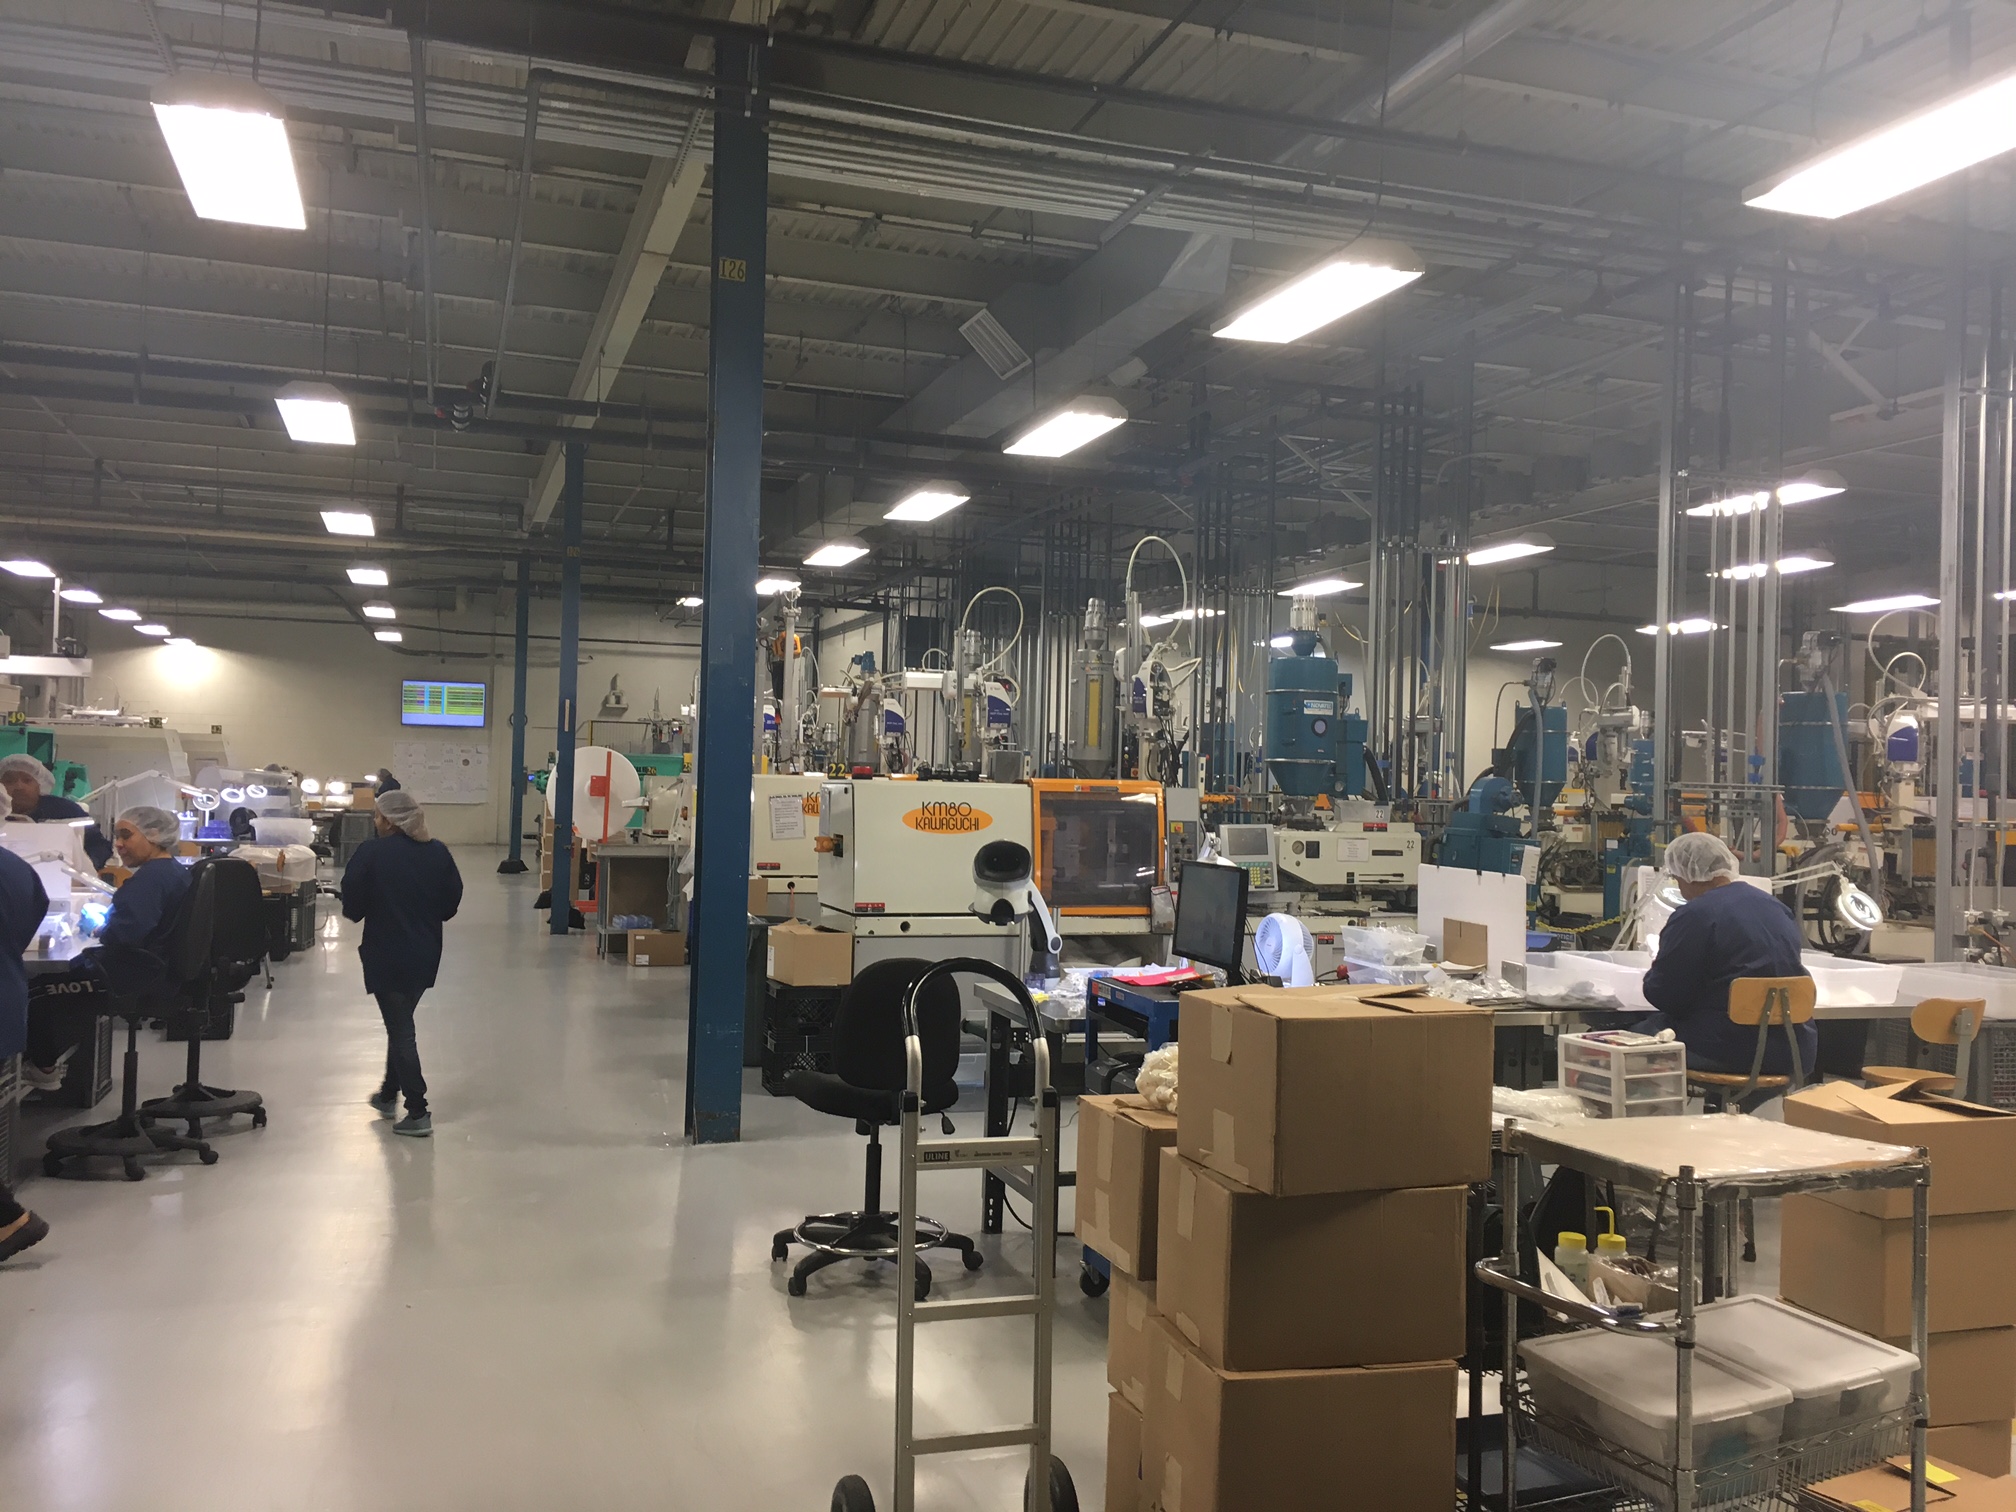 Connecticut manufacturer faces difficulty in hiring as extended unemployment benefits disrupt job market